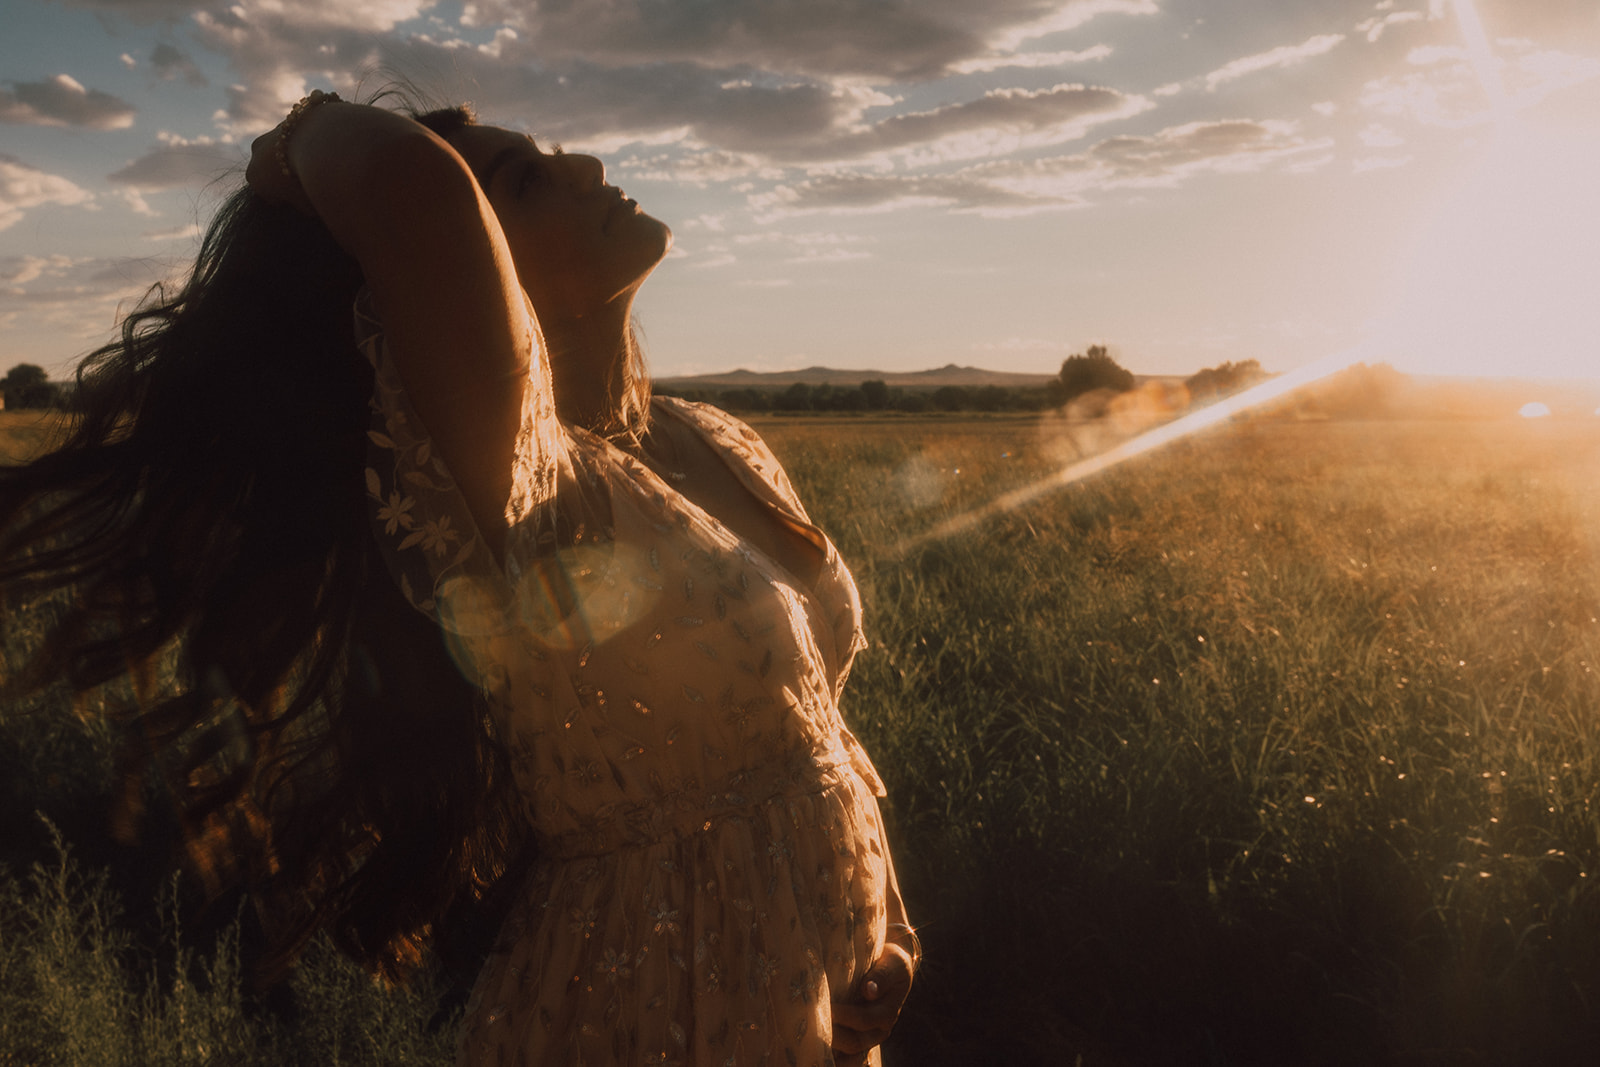 golden hour sunset maternity session in Albuquerque New Mexico 